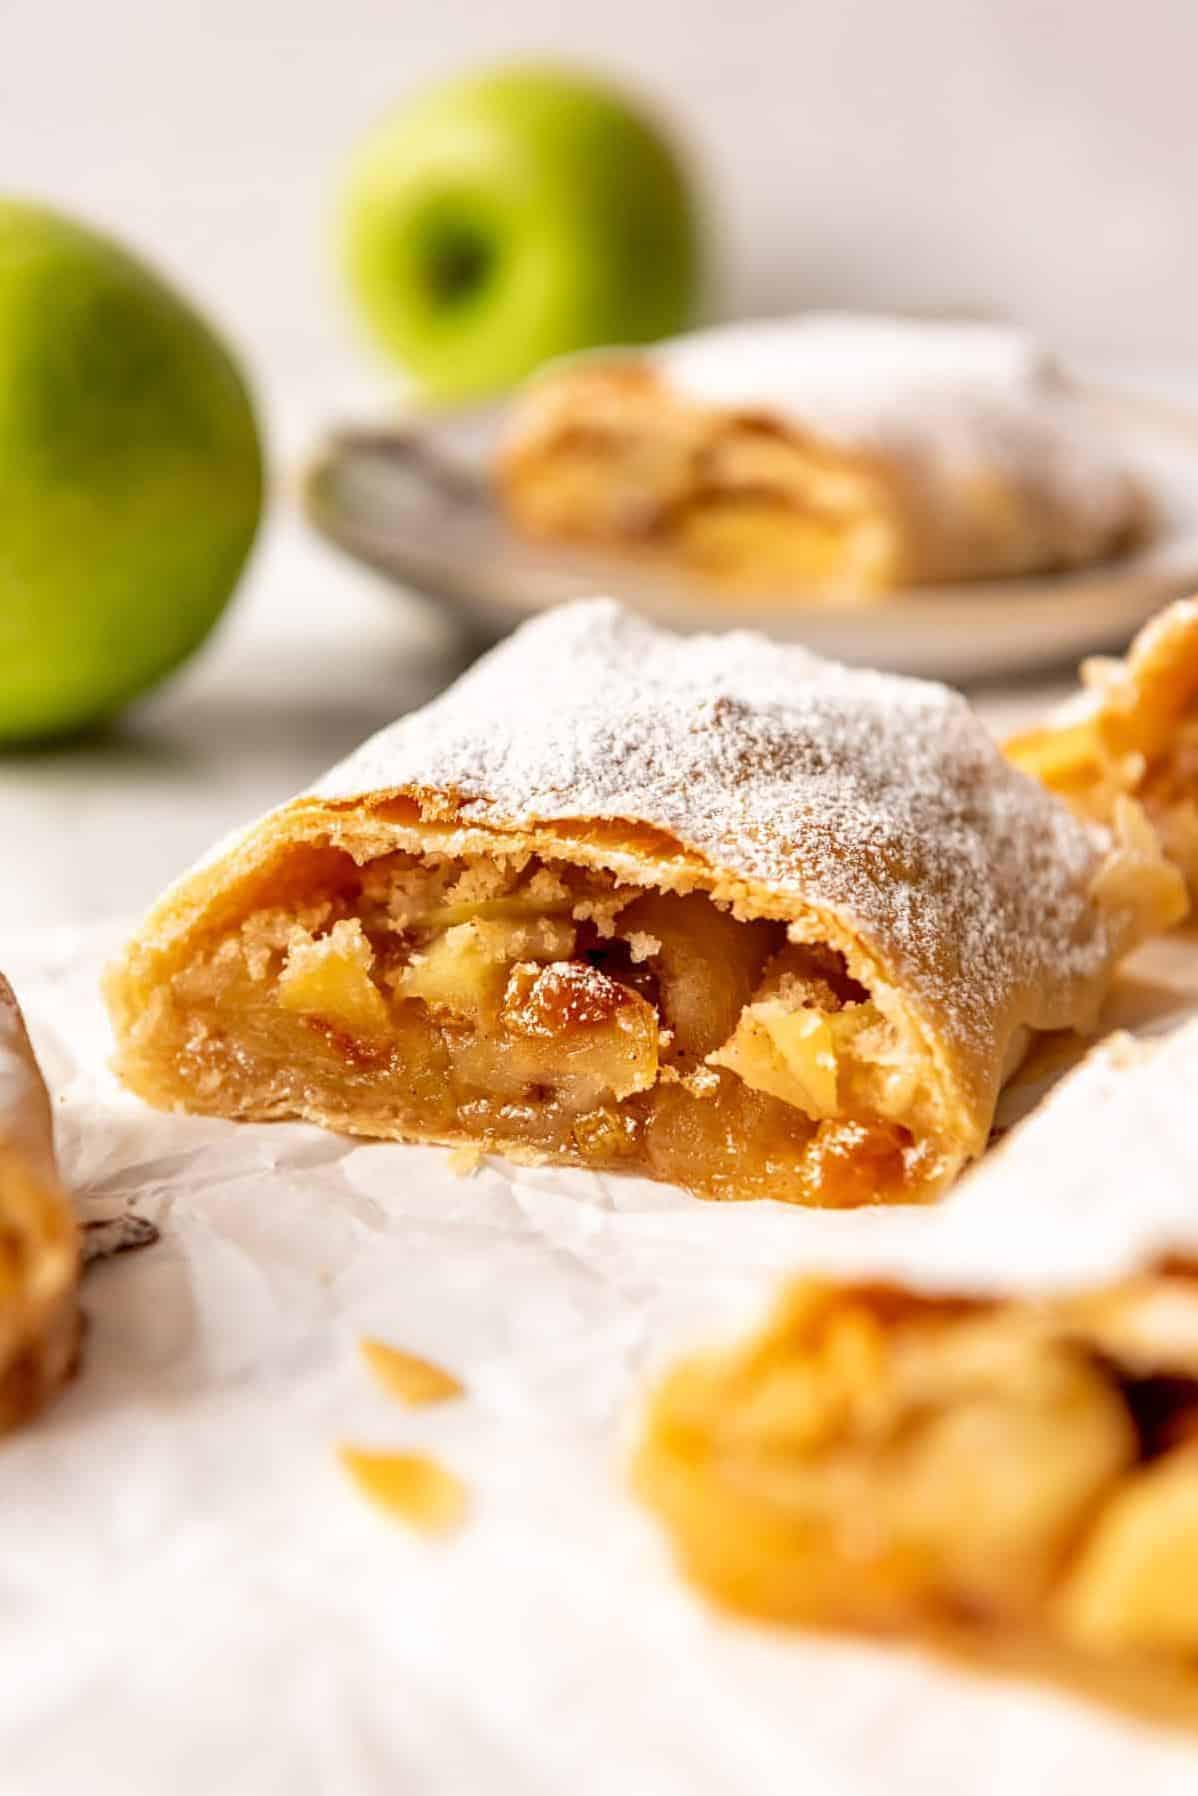  A delicious twist on traditional apple pie